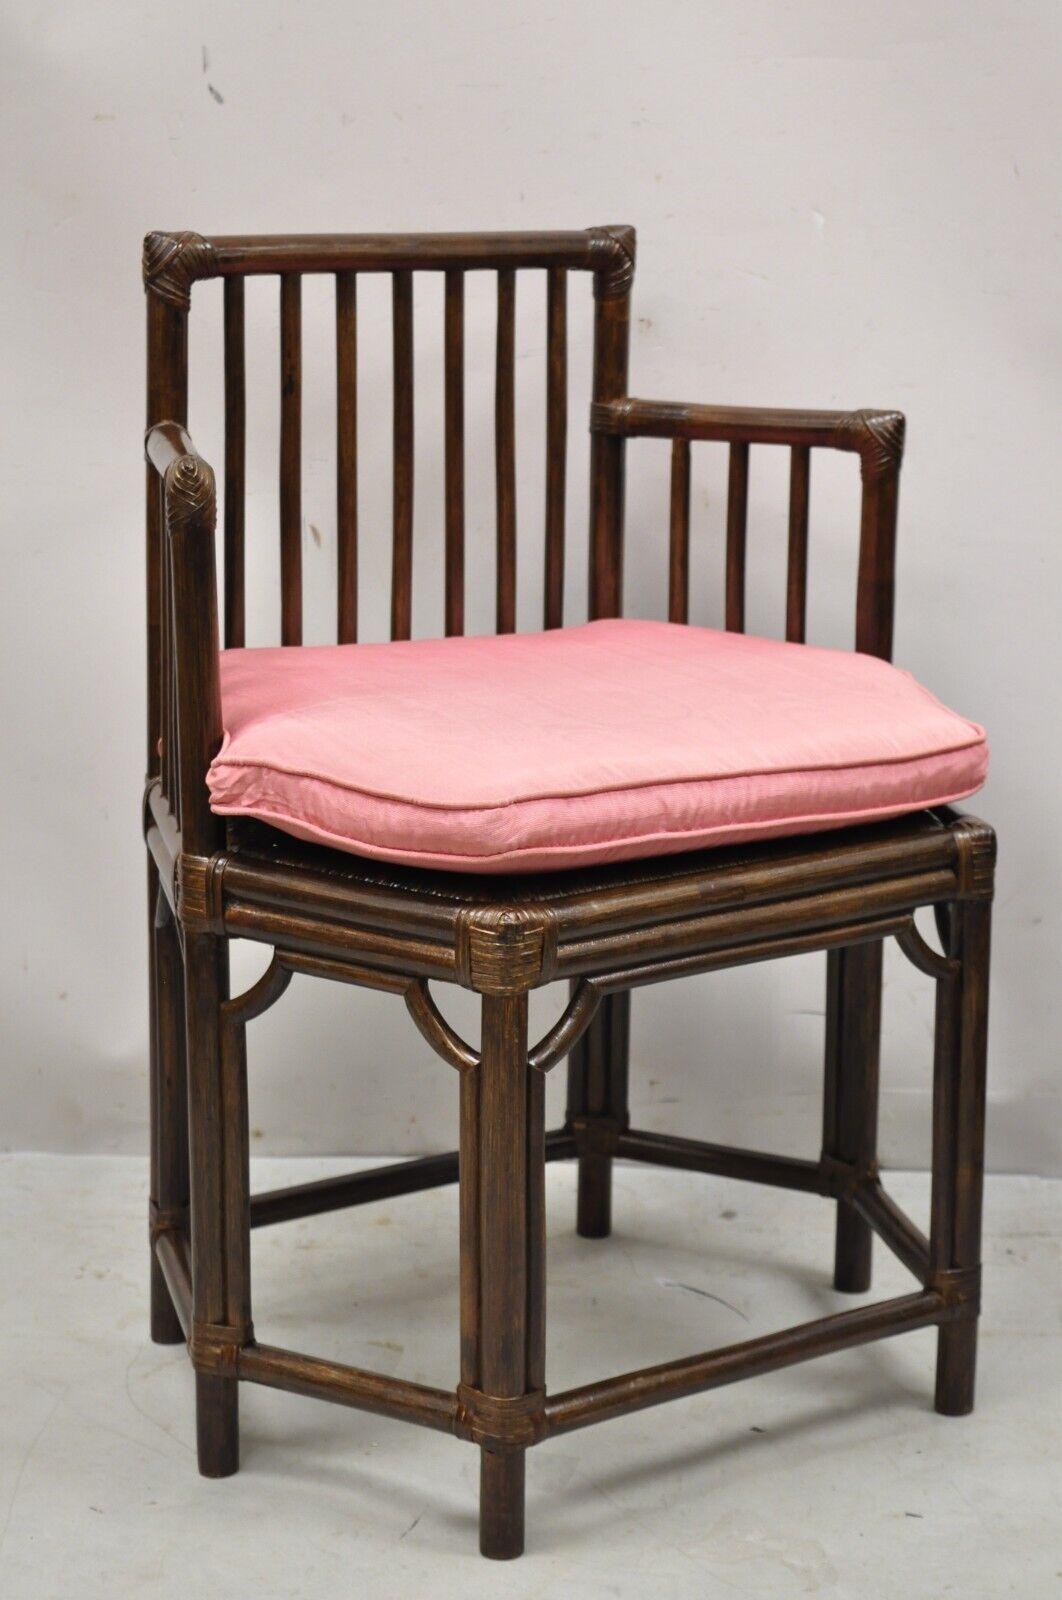 Vintage Chinoiserie Hollywood Regency Bamboo Rattan Hexagonal side cub arm chair. Item features a bamboo wooden frame, rattan seat, pink drop cushion, rattan wrapped corners, 6 legs, very nice vintage item, great style and form. Circa Mid 20th